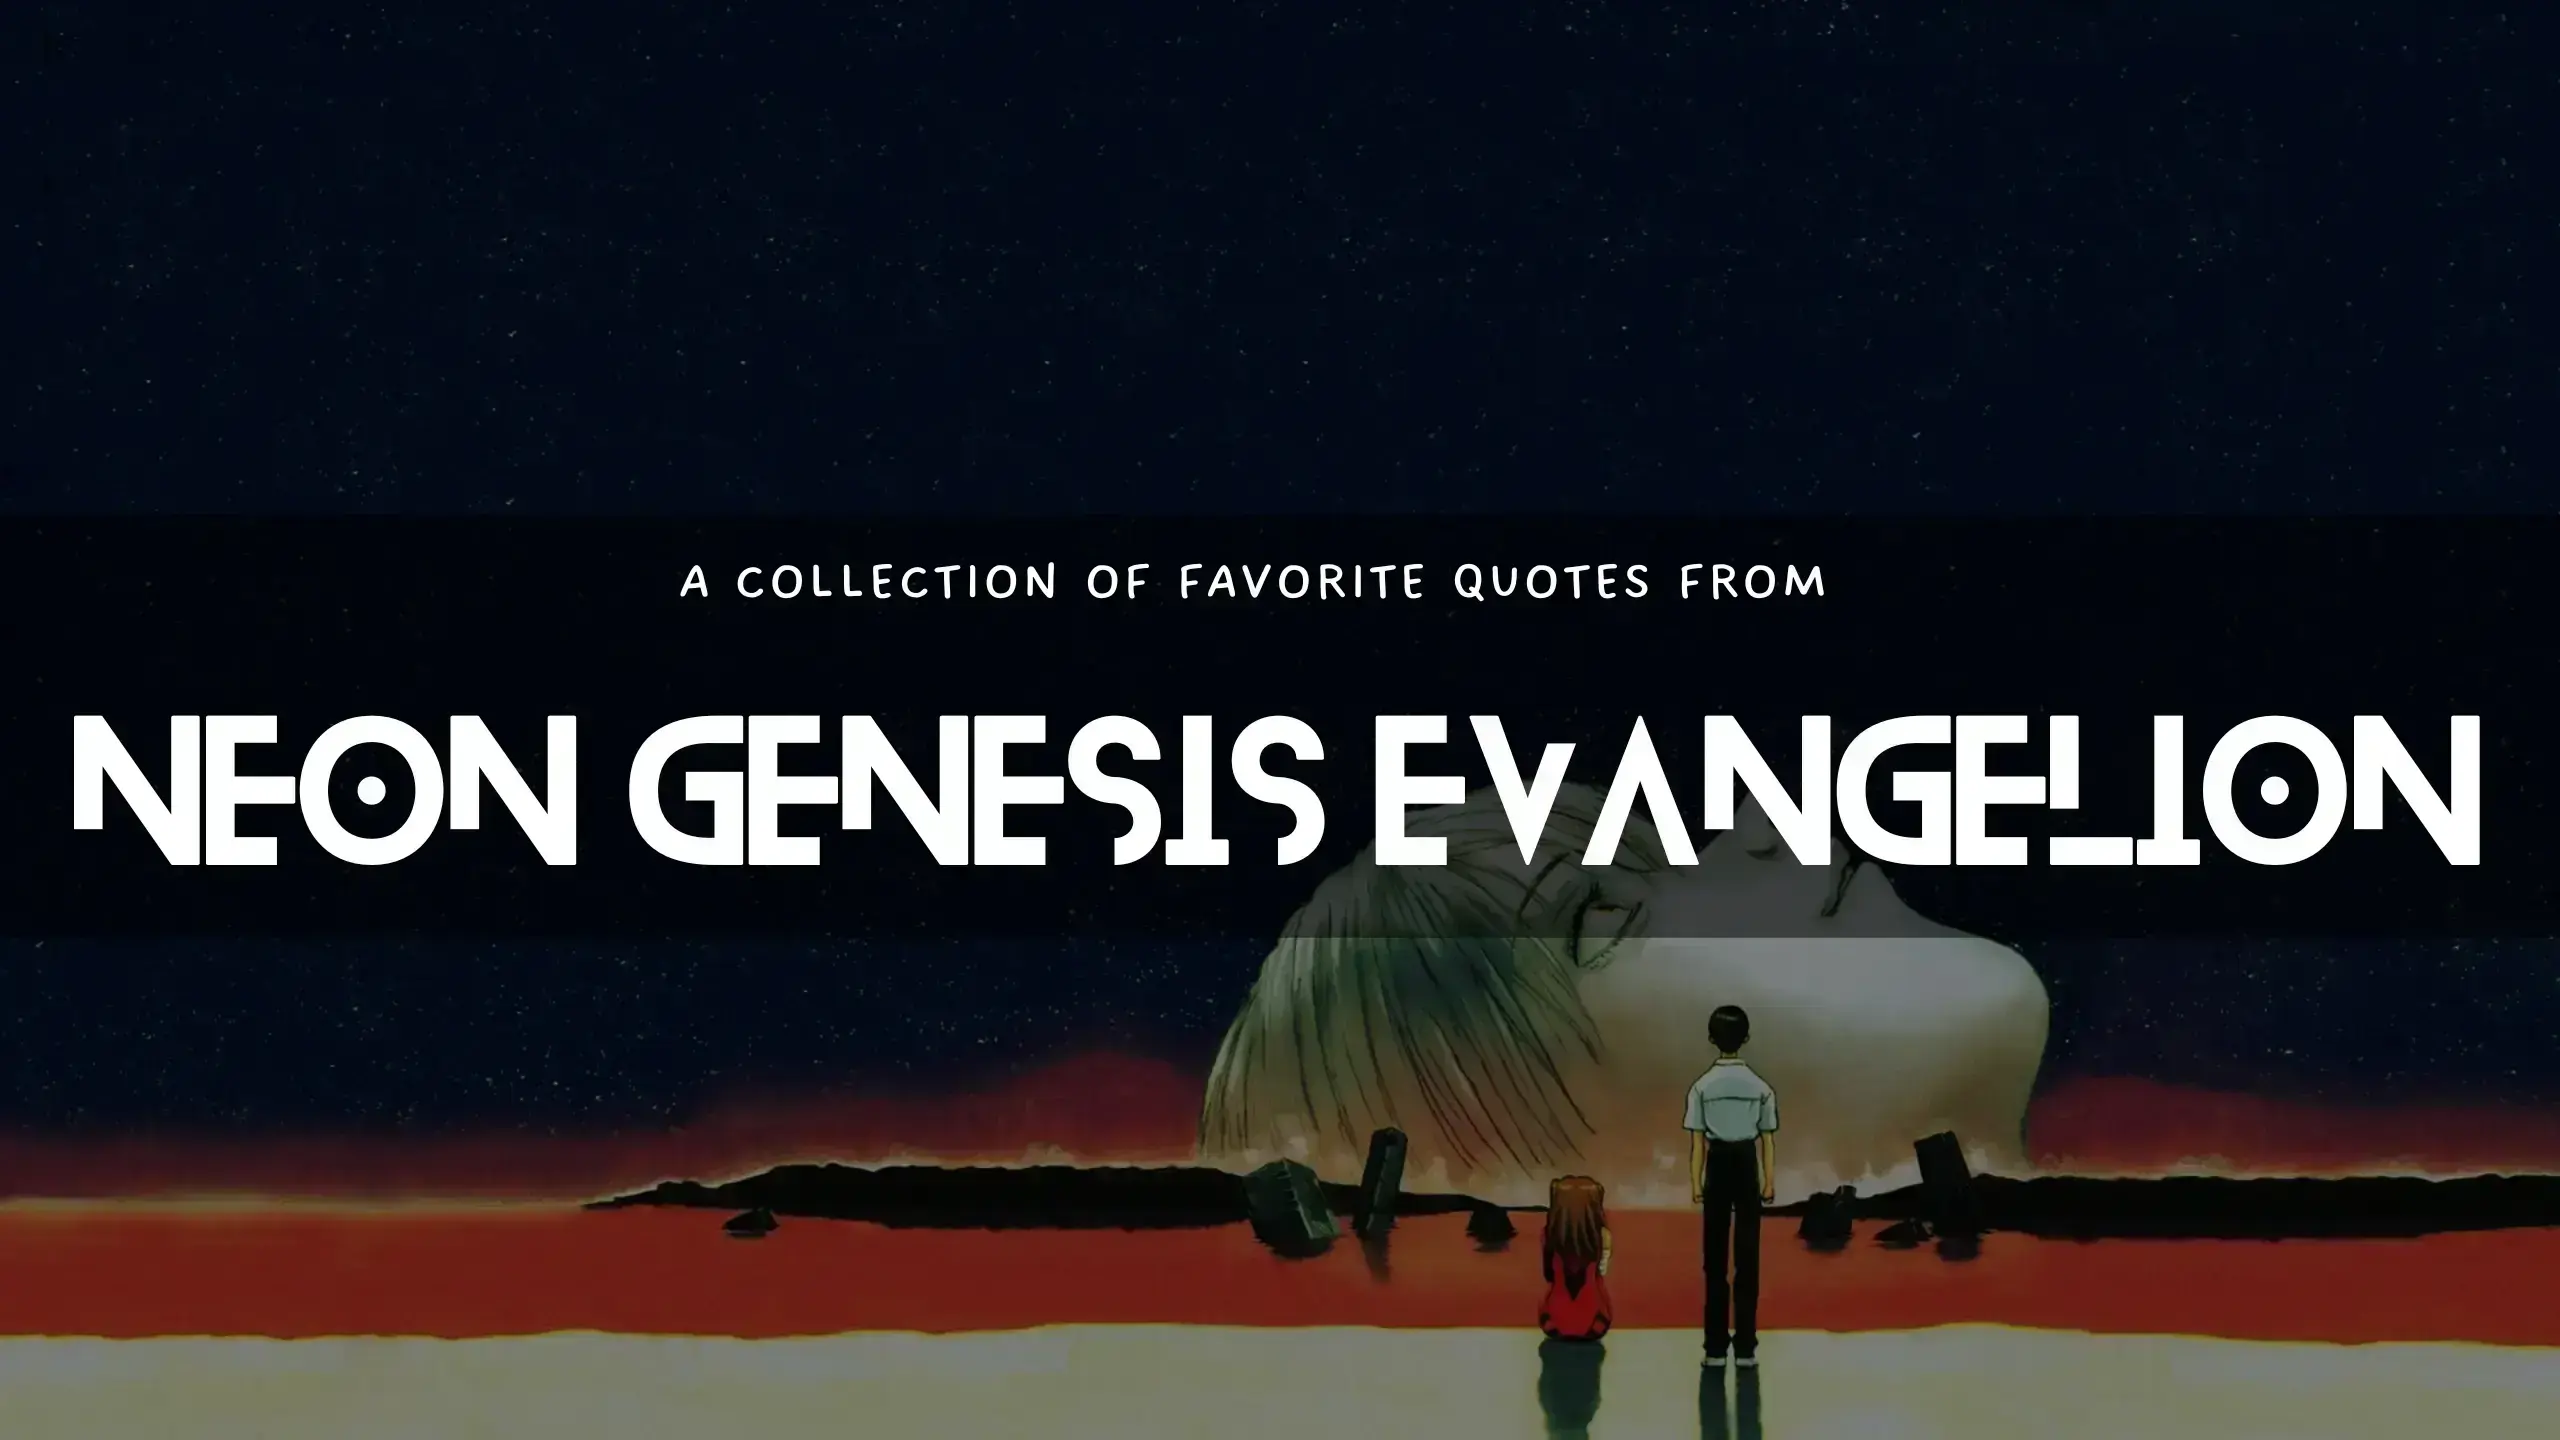 Awesome quotes from the Neon Genesis Evangelion Anime